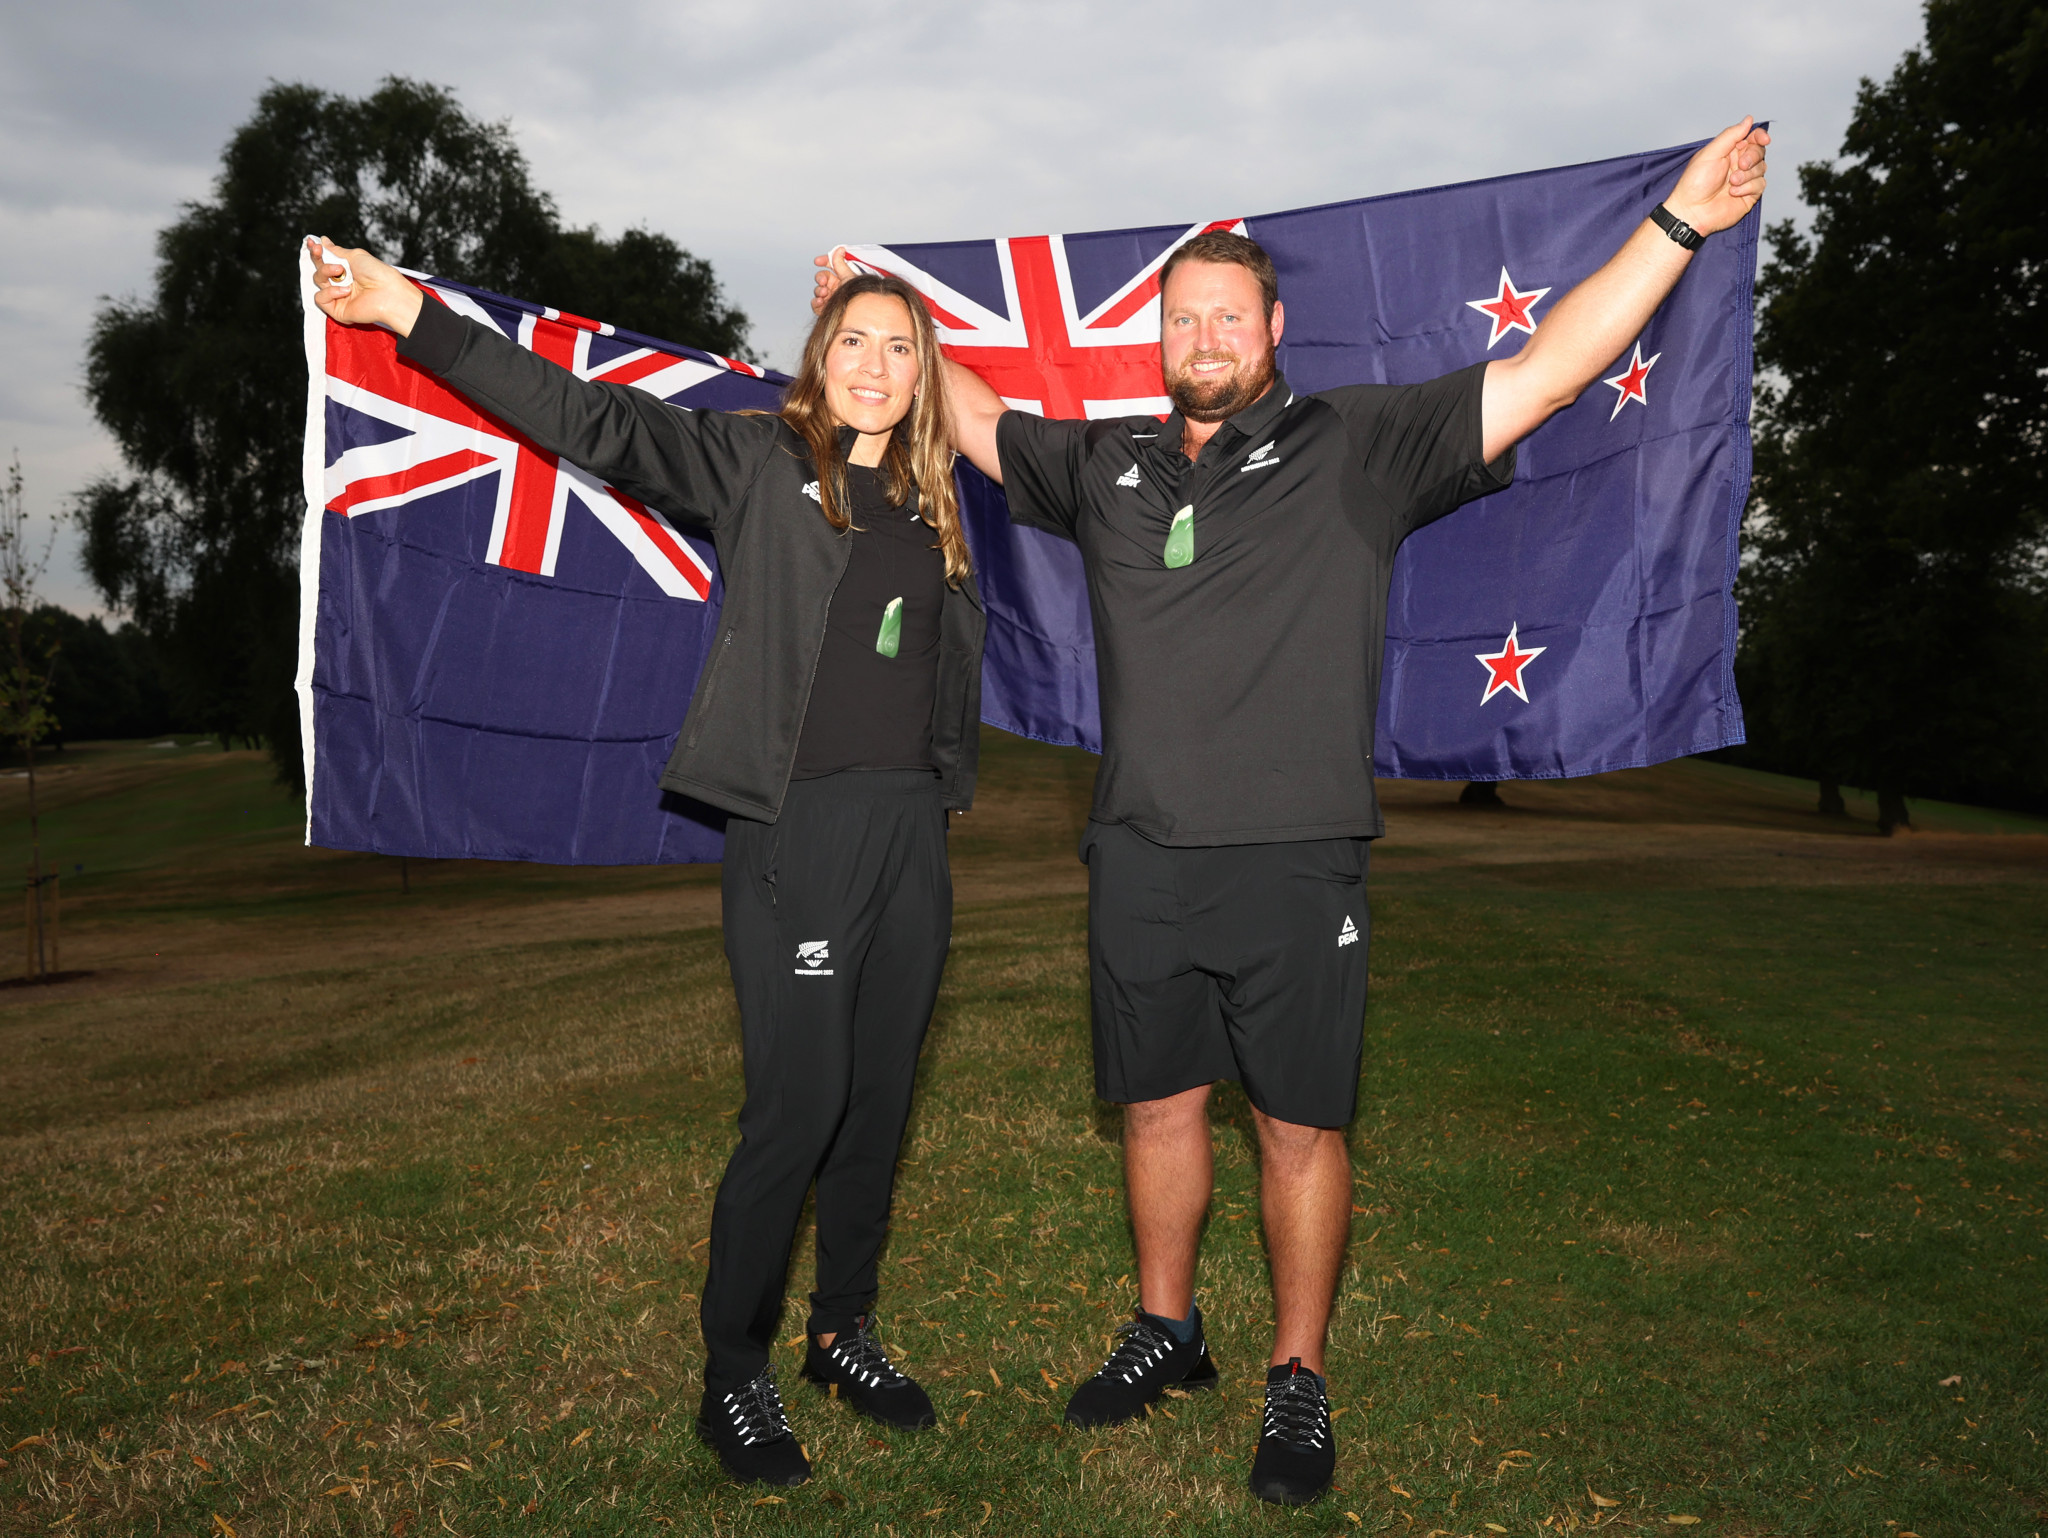 King and Walsh named New Zealand's flagbearers for Birmingham 2022 Opening Ceremony